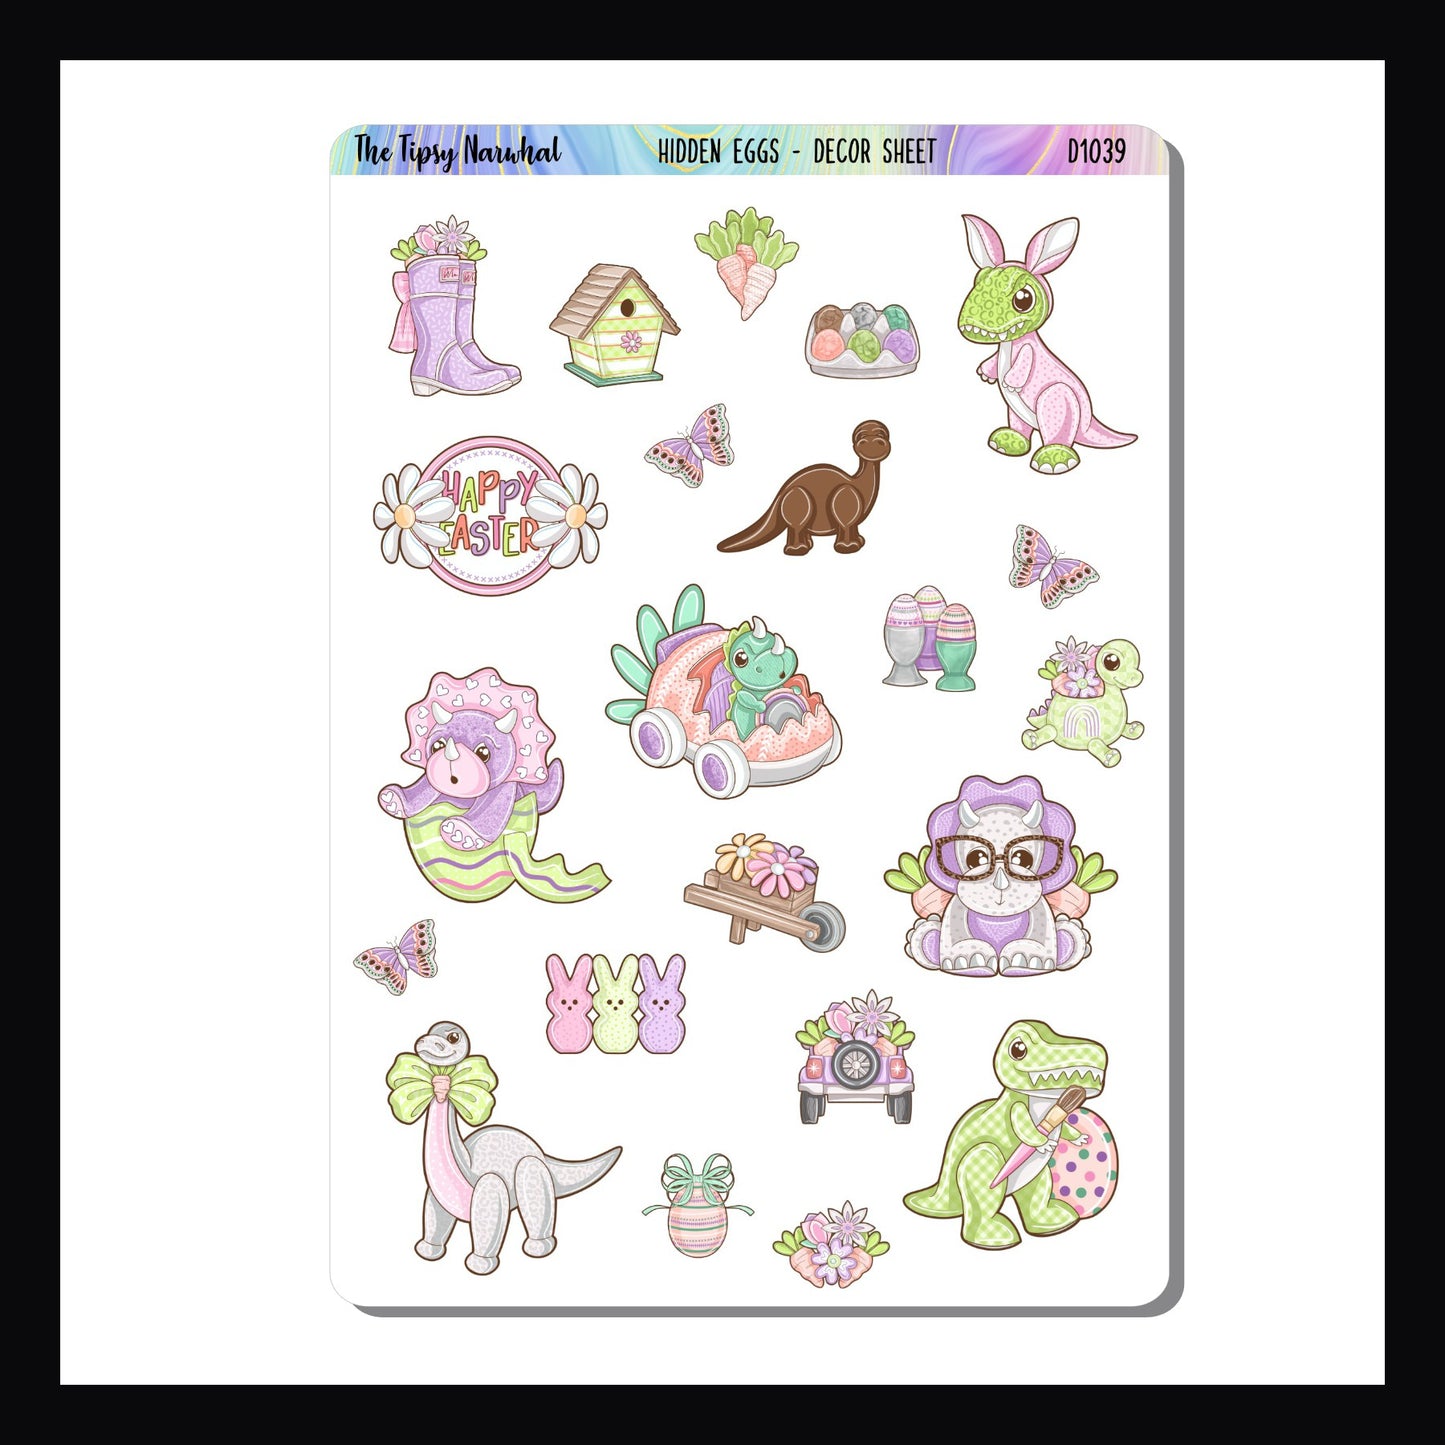 Hidden Eggs Journal Kit - Decor sheet add-on.  Decor sheet features multiple Easter and spring themed stickers including several dinosaur stickers, flowers, butterflies and a "happy easter" sticker. 